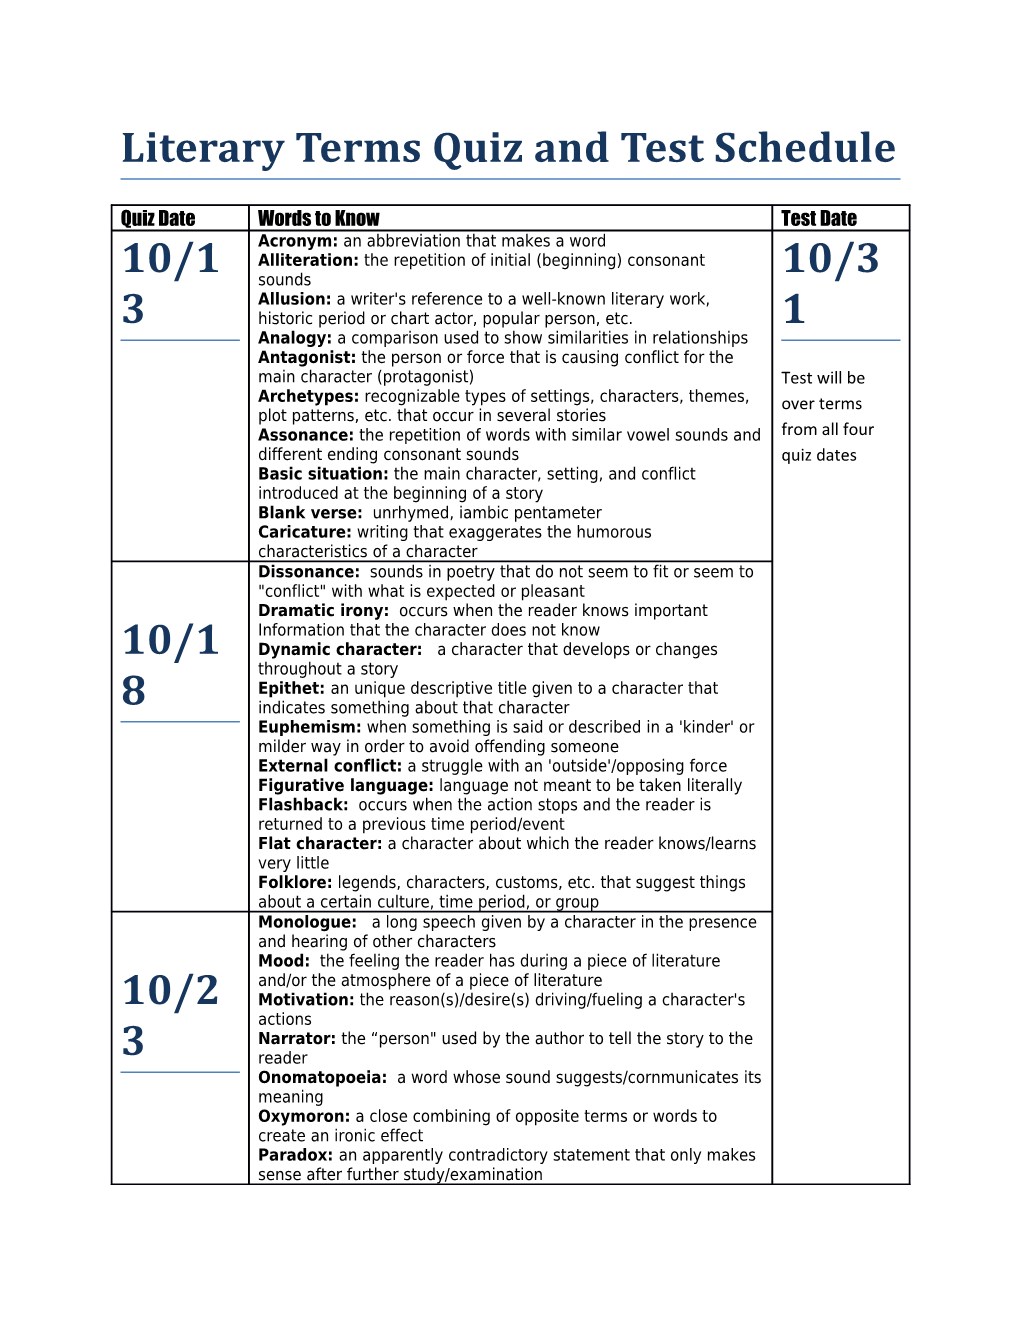 Literary Terms Quiz and Test Schedule s1